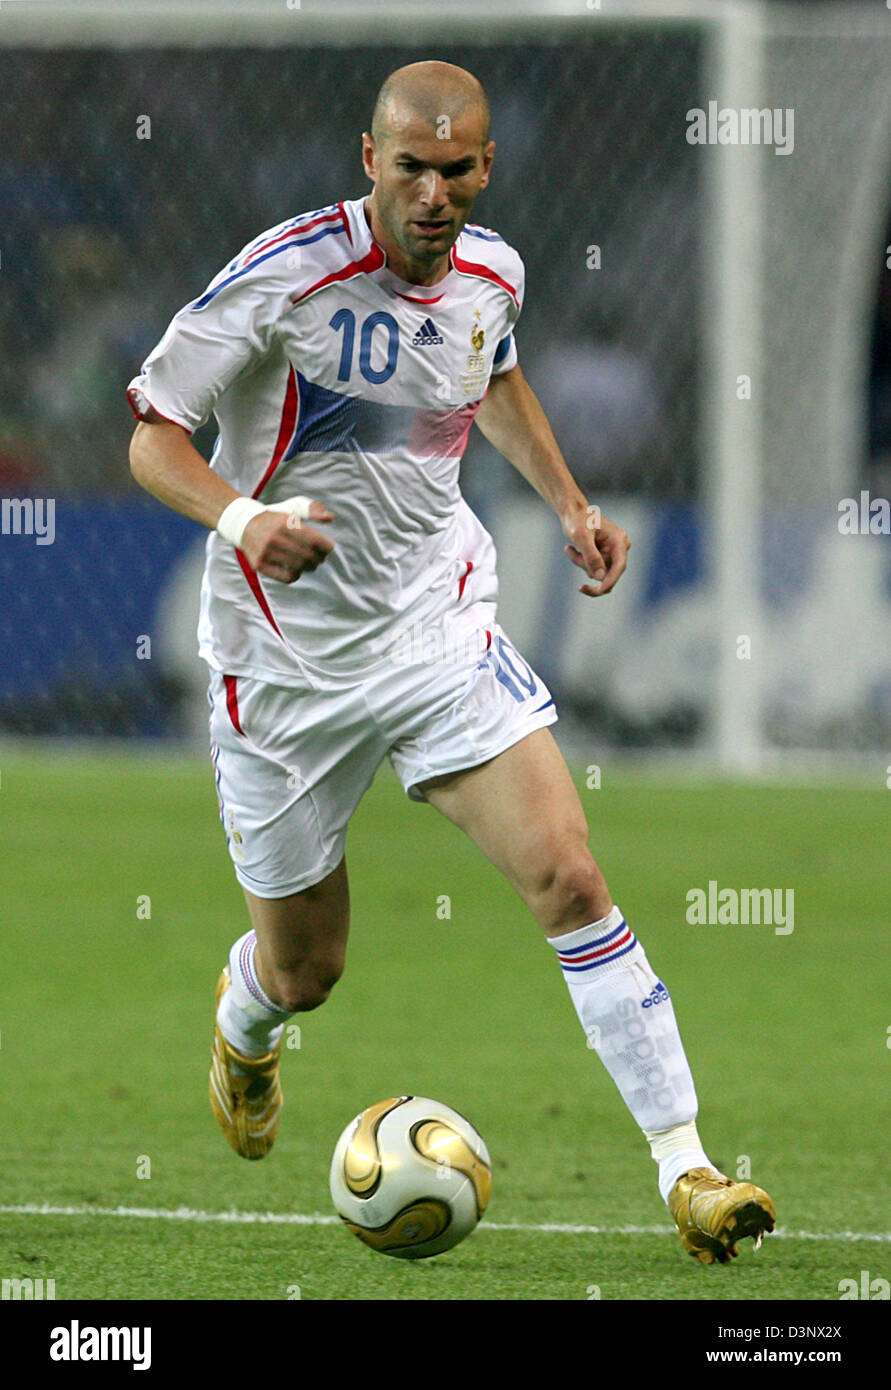 Zinedine Zidane from France controls the ball during the final of the 2006 FIFA World Cup Italy vs. France at the Olympic Stadium in Berlin, Germany, Sunday 09 July 2006. Photo: OLIVER BERG +++ Mobile Services OUT +++ Please refer to FIFA's Terms and Conditions Stock Photo